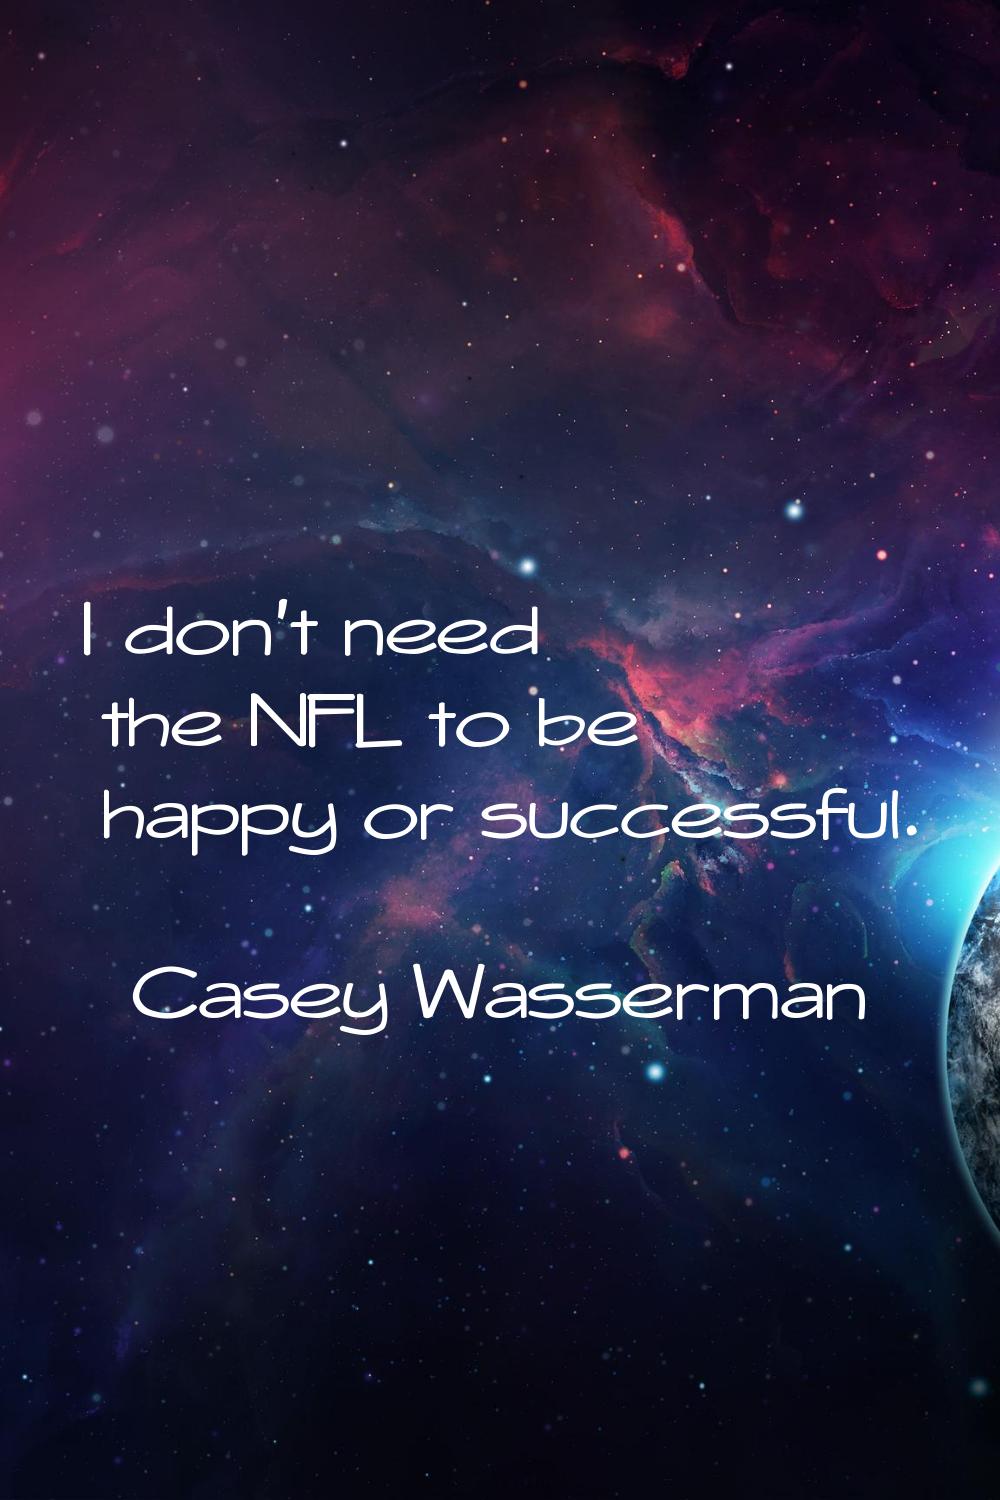 I don't need the NFL to be happy or successful.